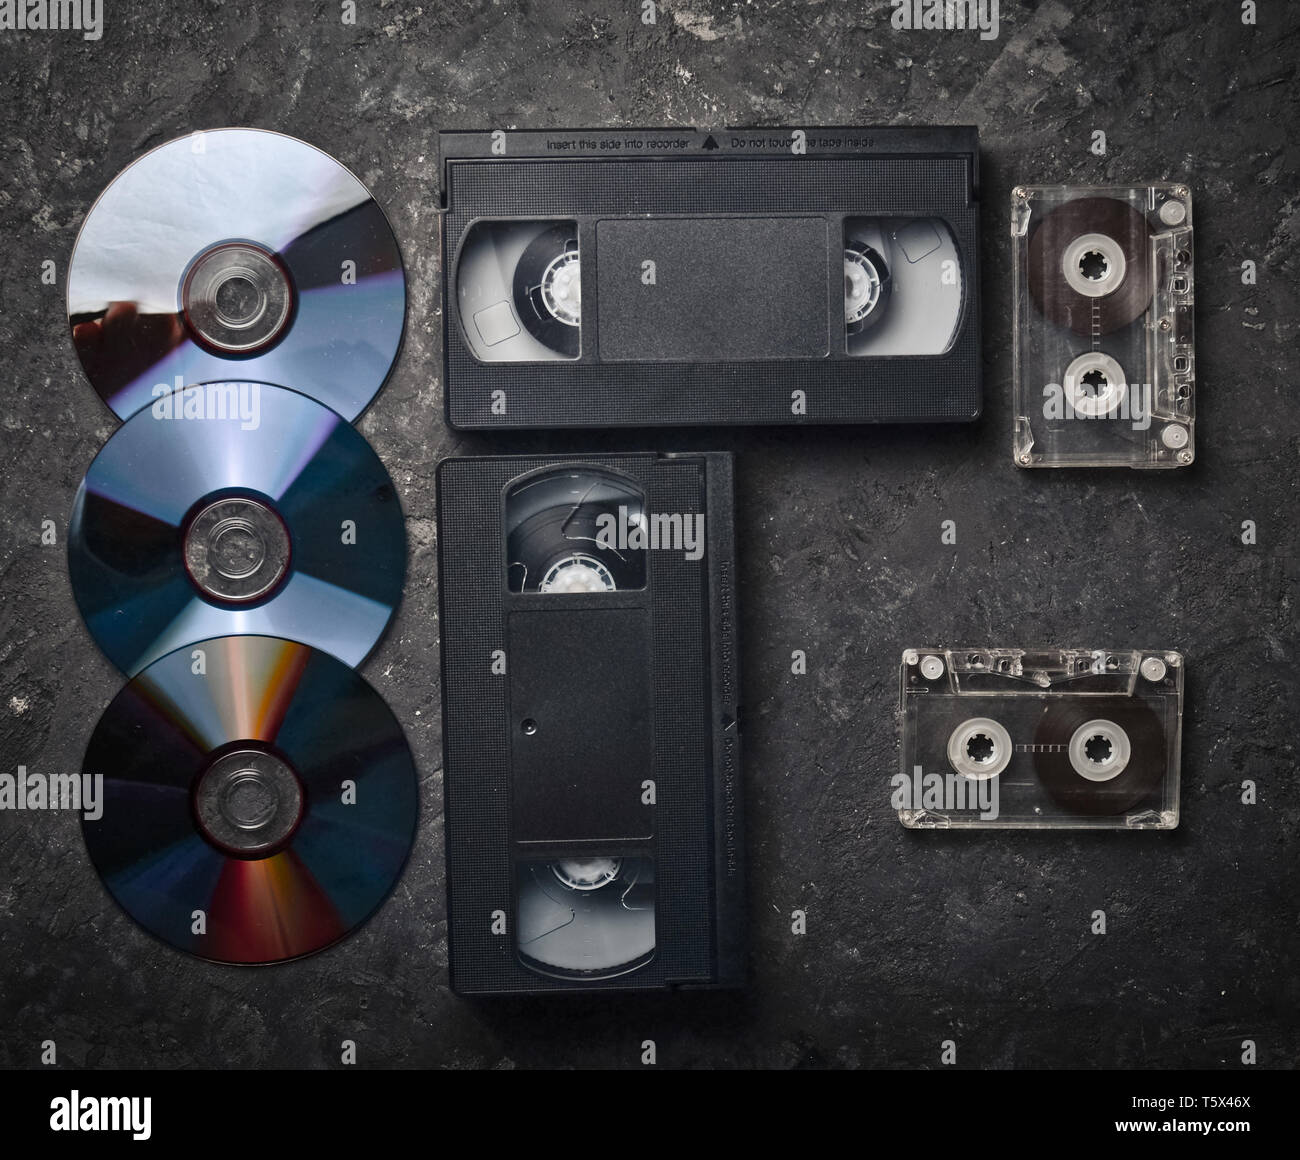 Flat lay video cassettes, CD's, audio cassette on a black concrete surface. Retro media technology of the past. Top view. Stock Photo